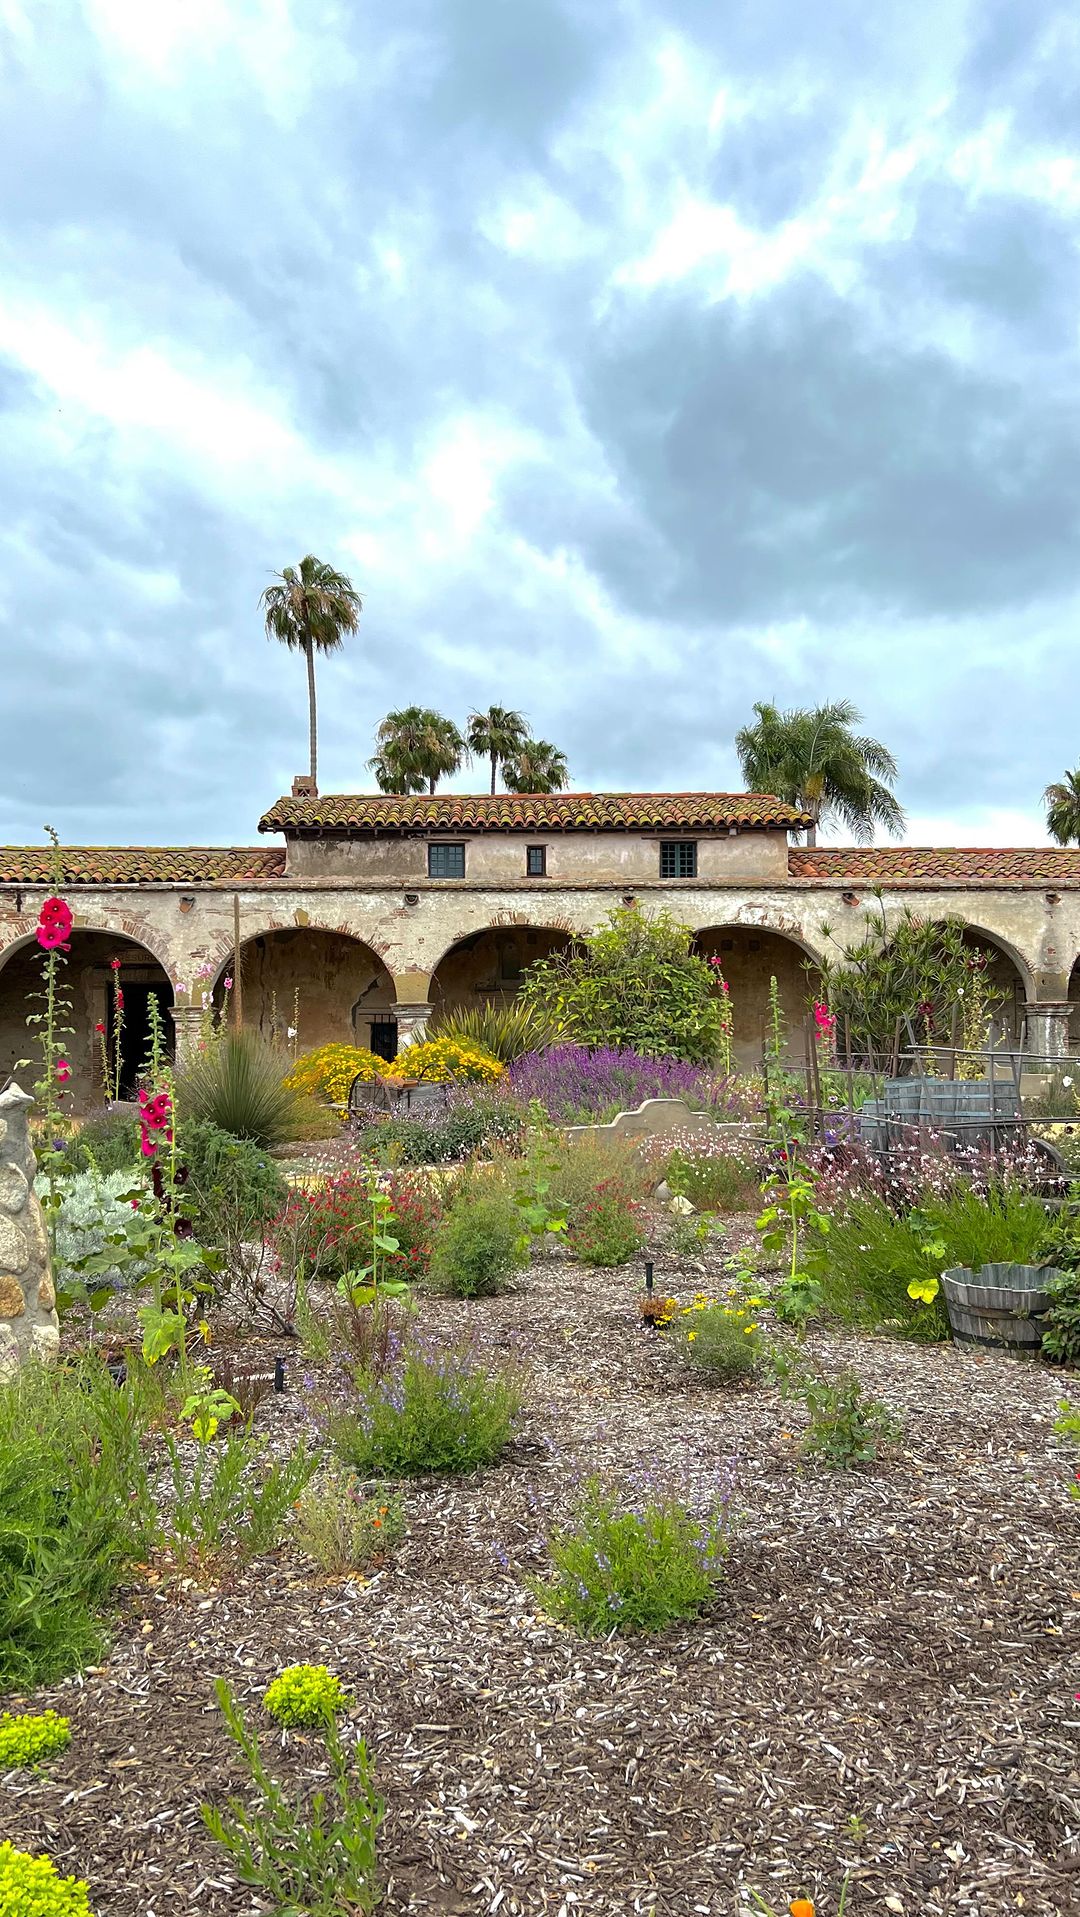 Whale Watching and Culinary Delights in San Juan Capistrano